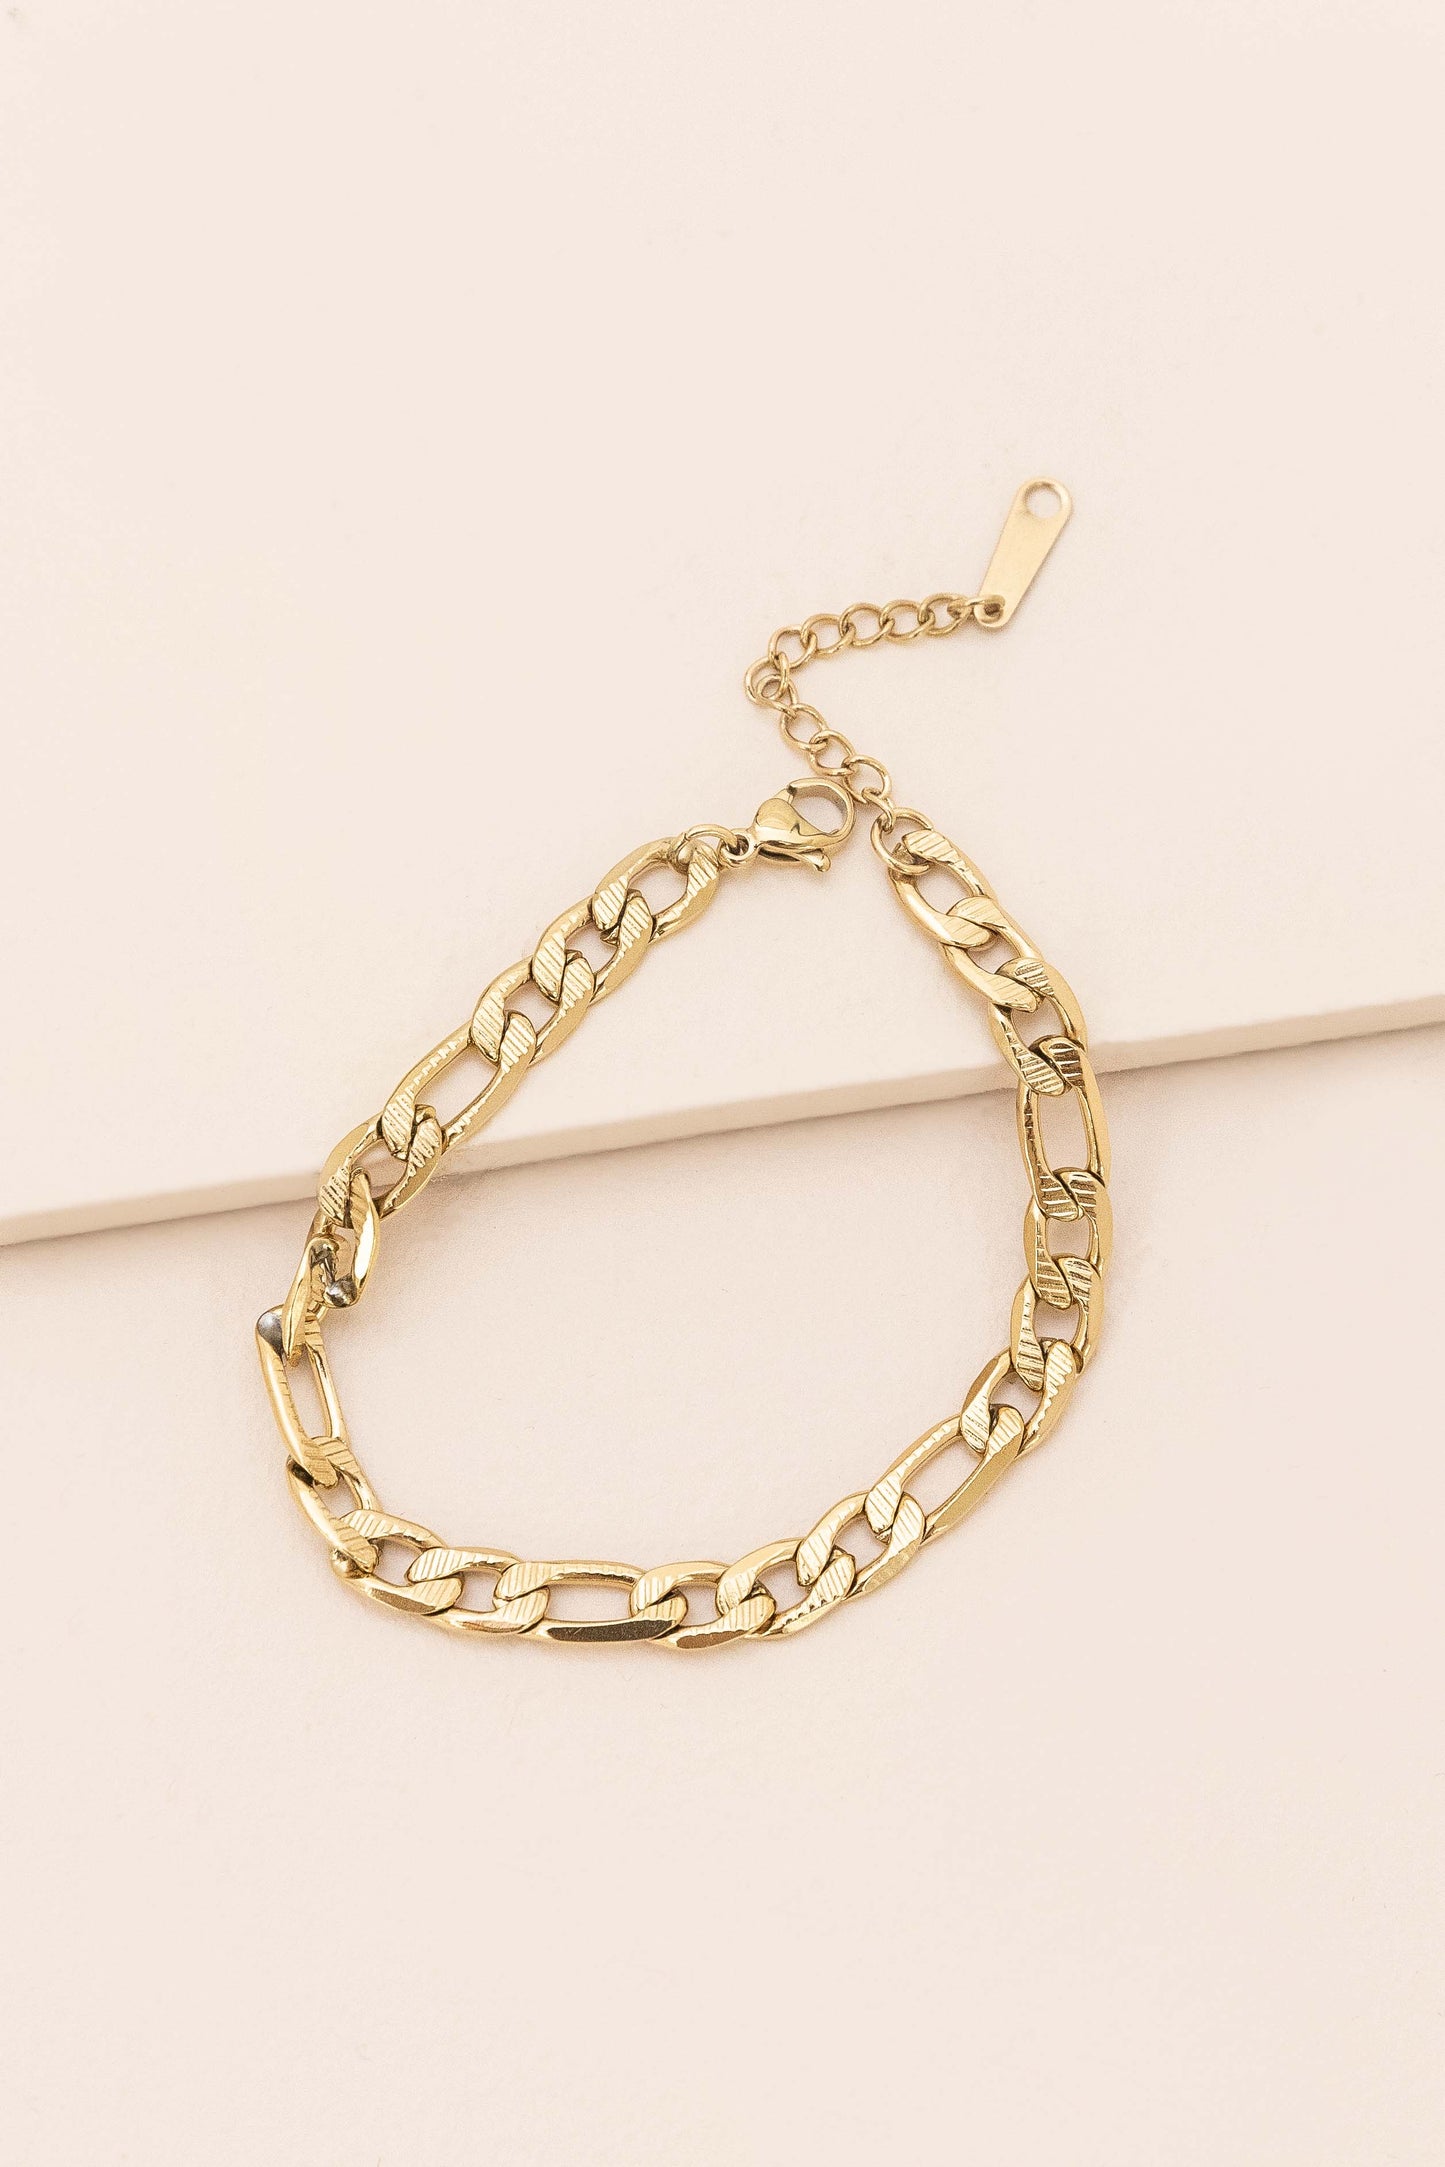 Thick and Thin Chain Bracelet (14K)